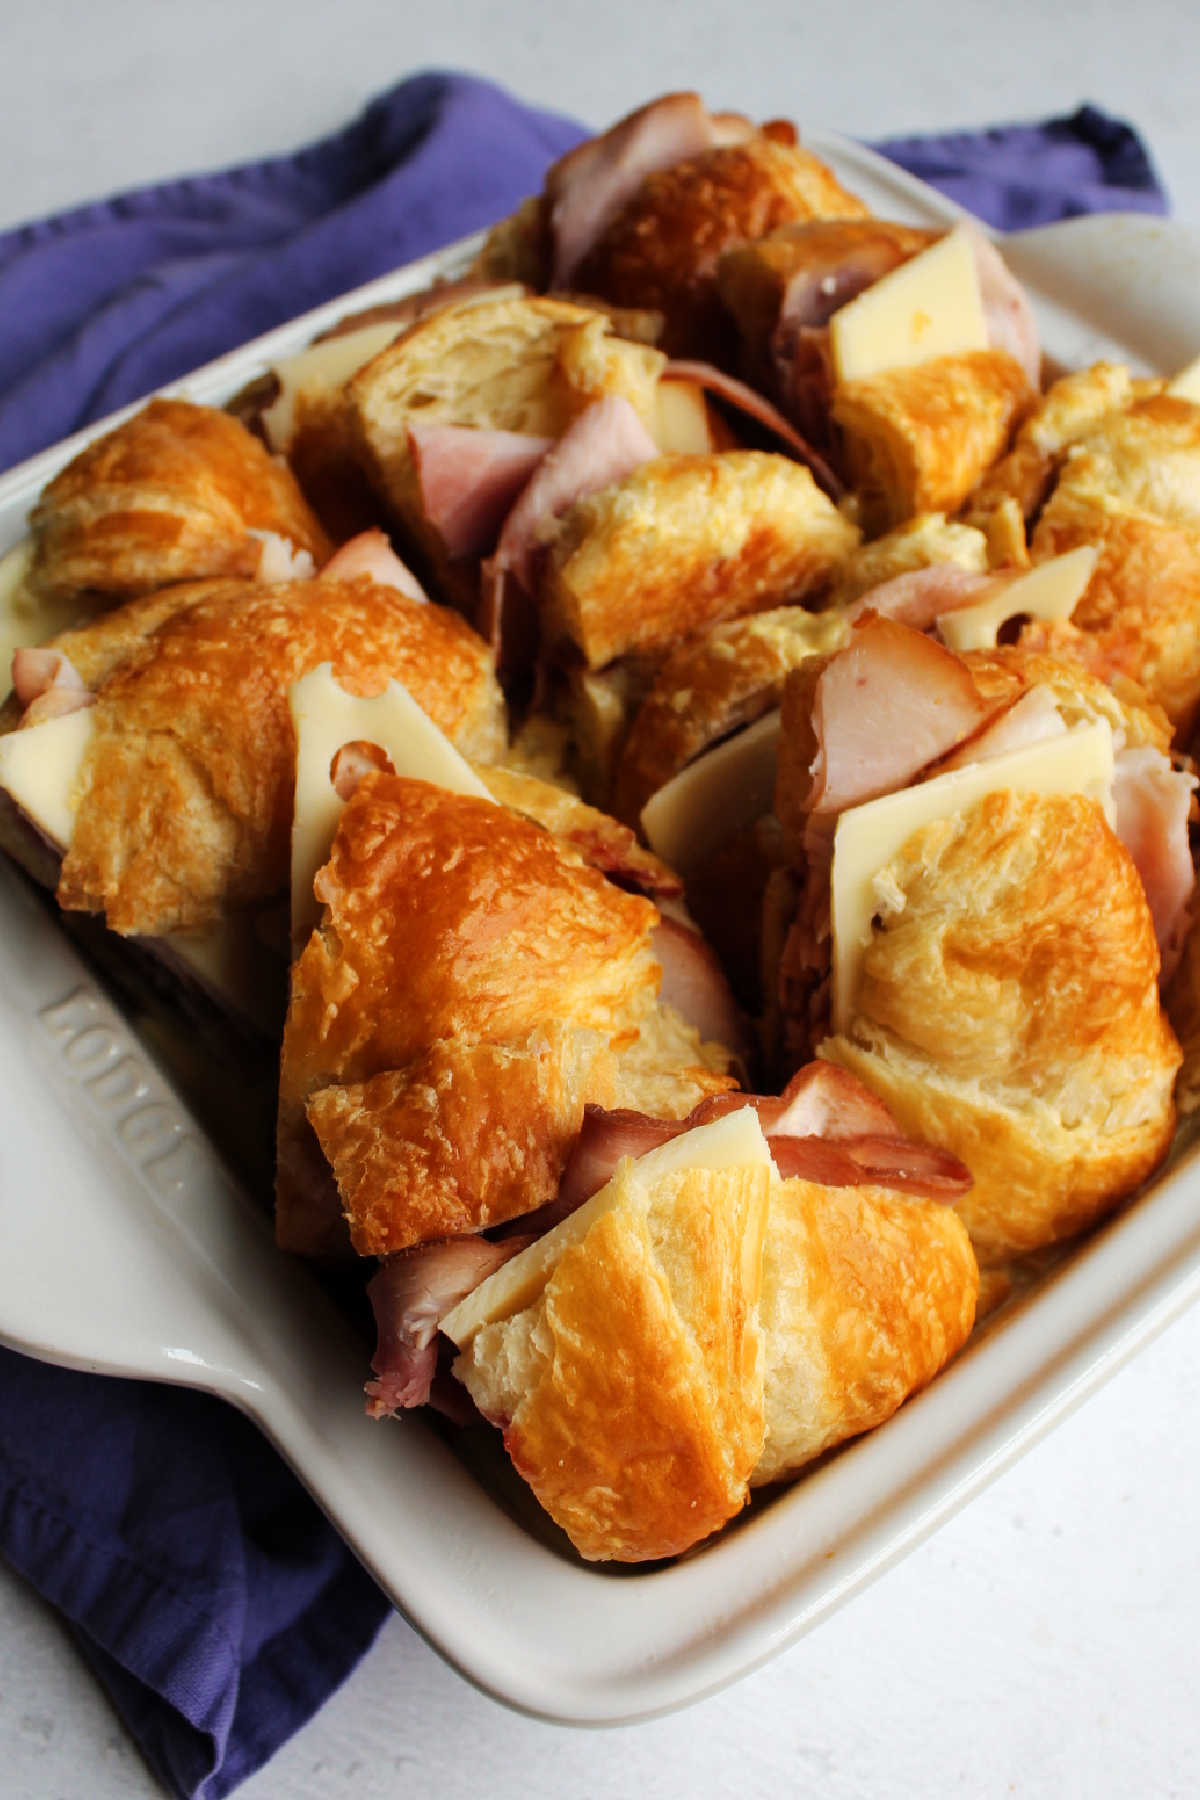 Ham, cheese and raspberry sandwiches arranged in baking dish.